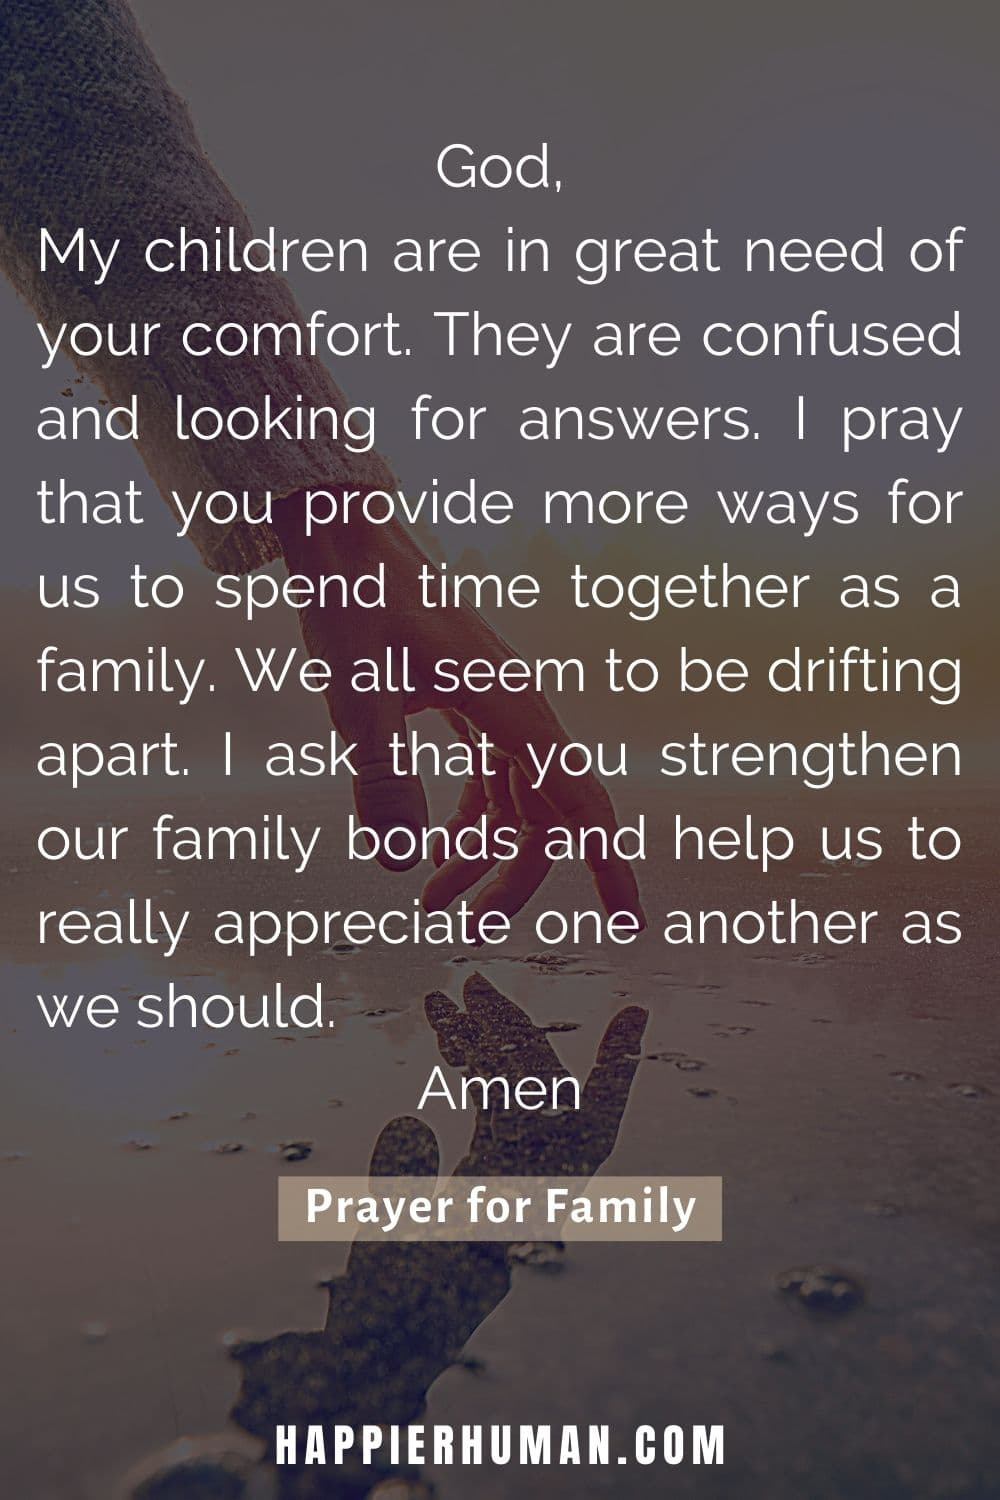 parents prayer for daughter